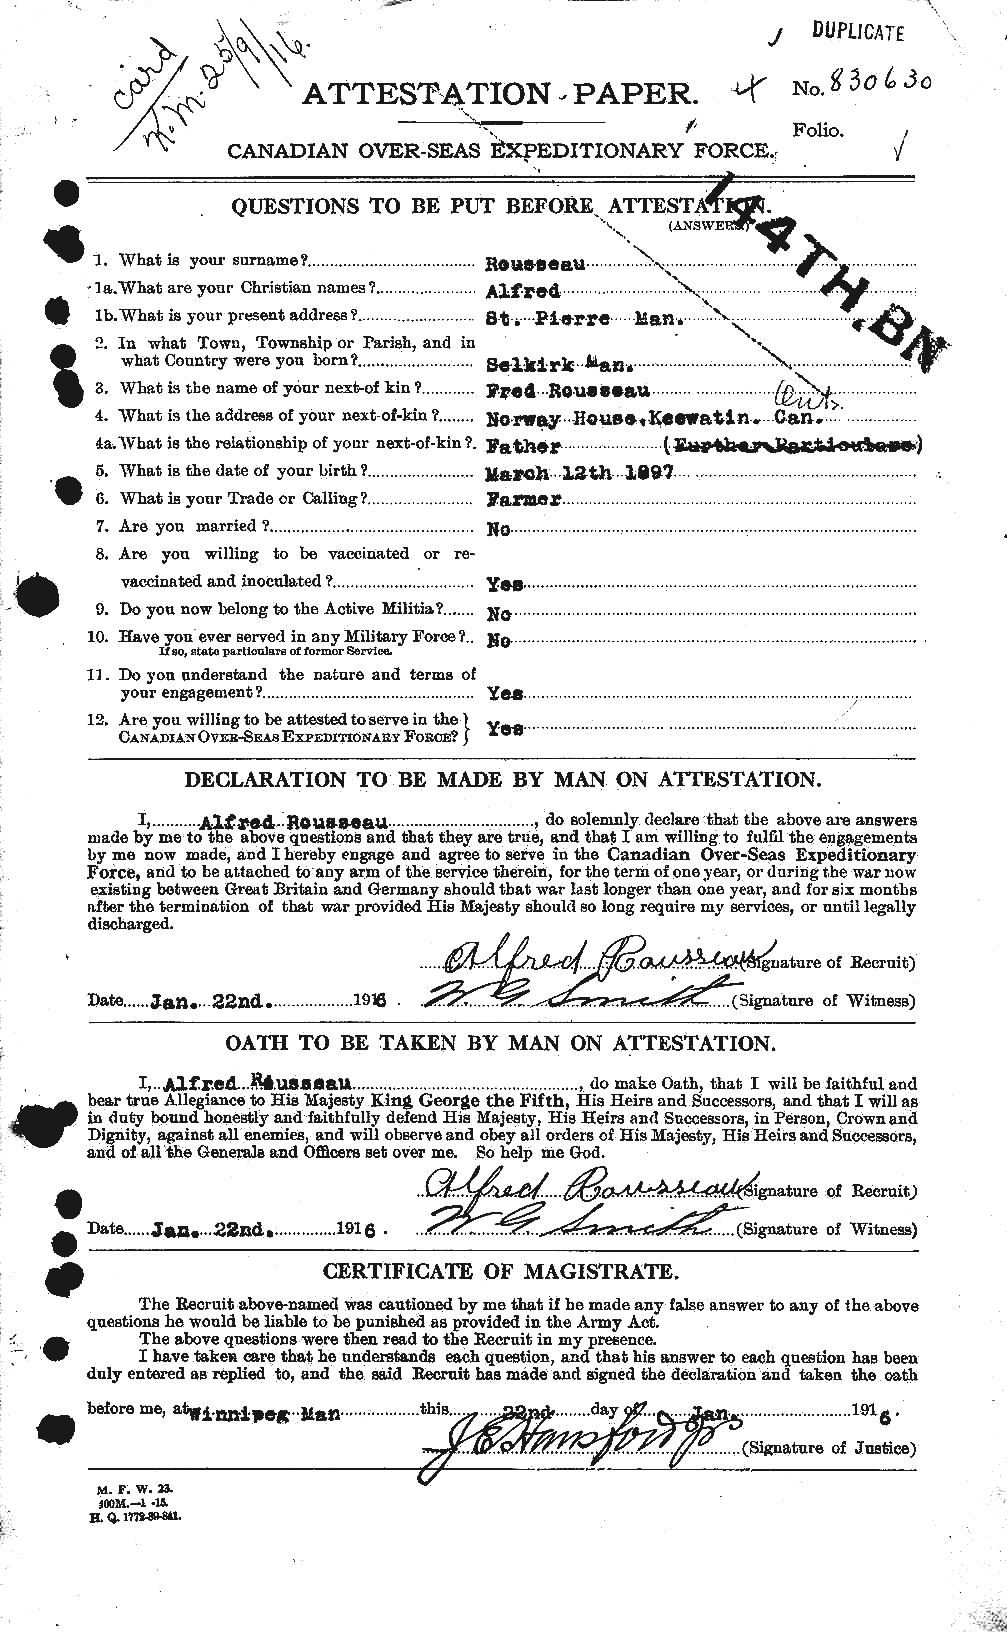 Personnel Records of the First World War - CEF 617633a